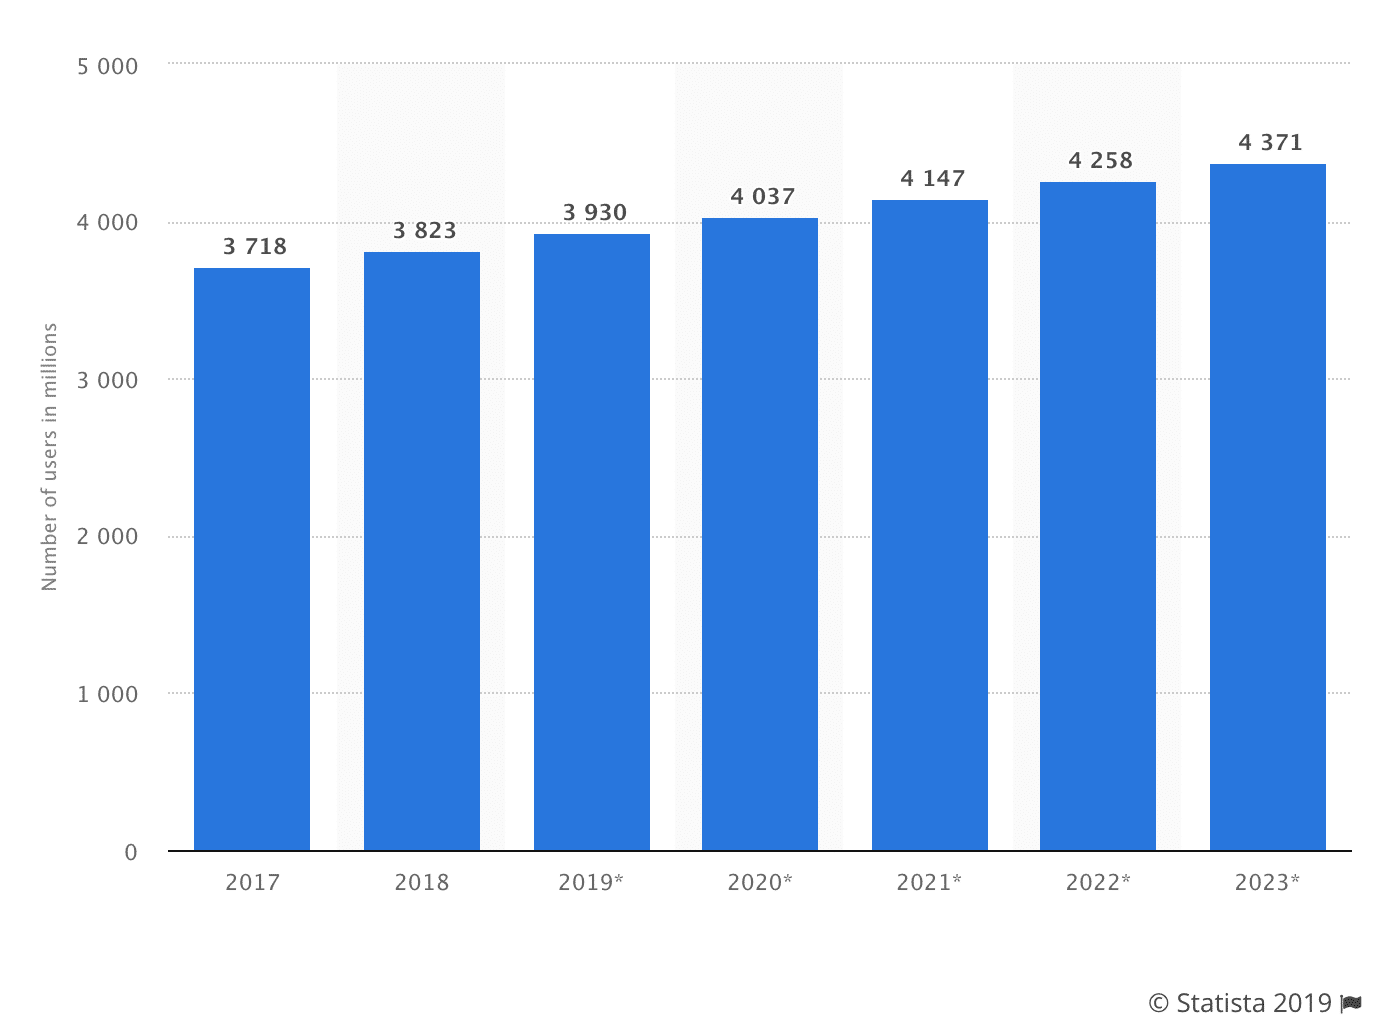 Statistic: Number of e-mail users worldwide from 2017 to 2023 (in millions) | Statista